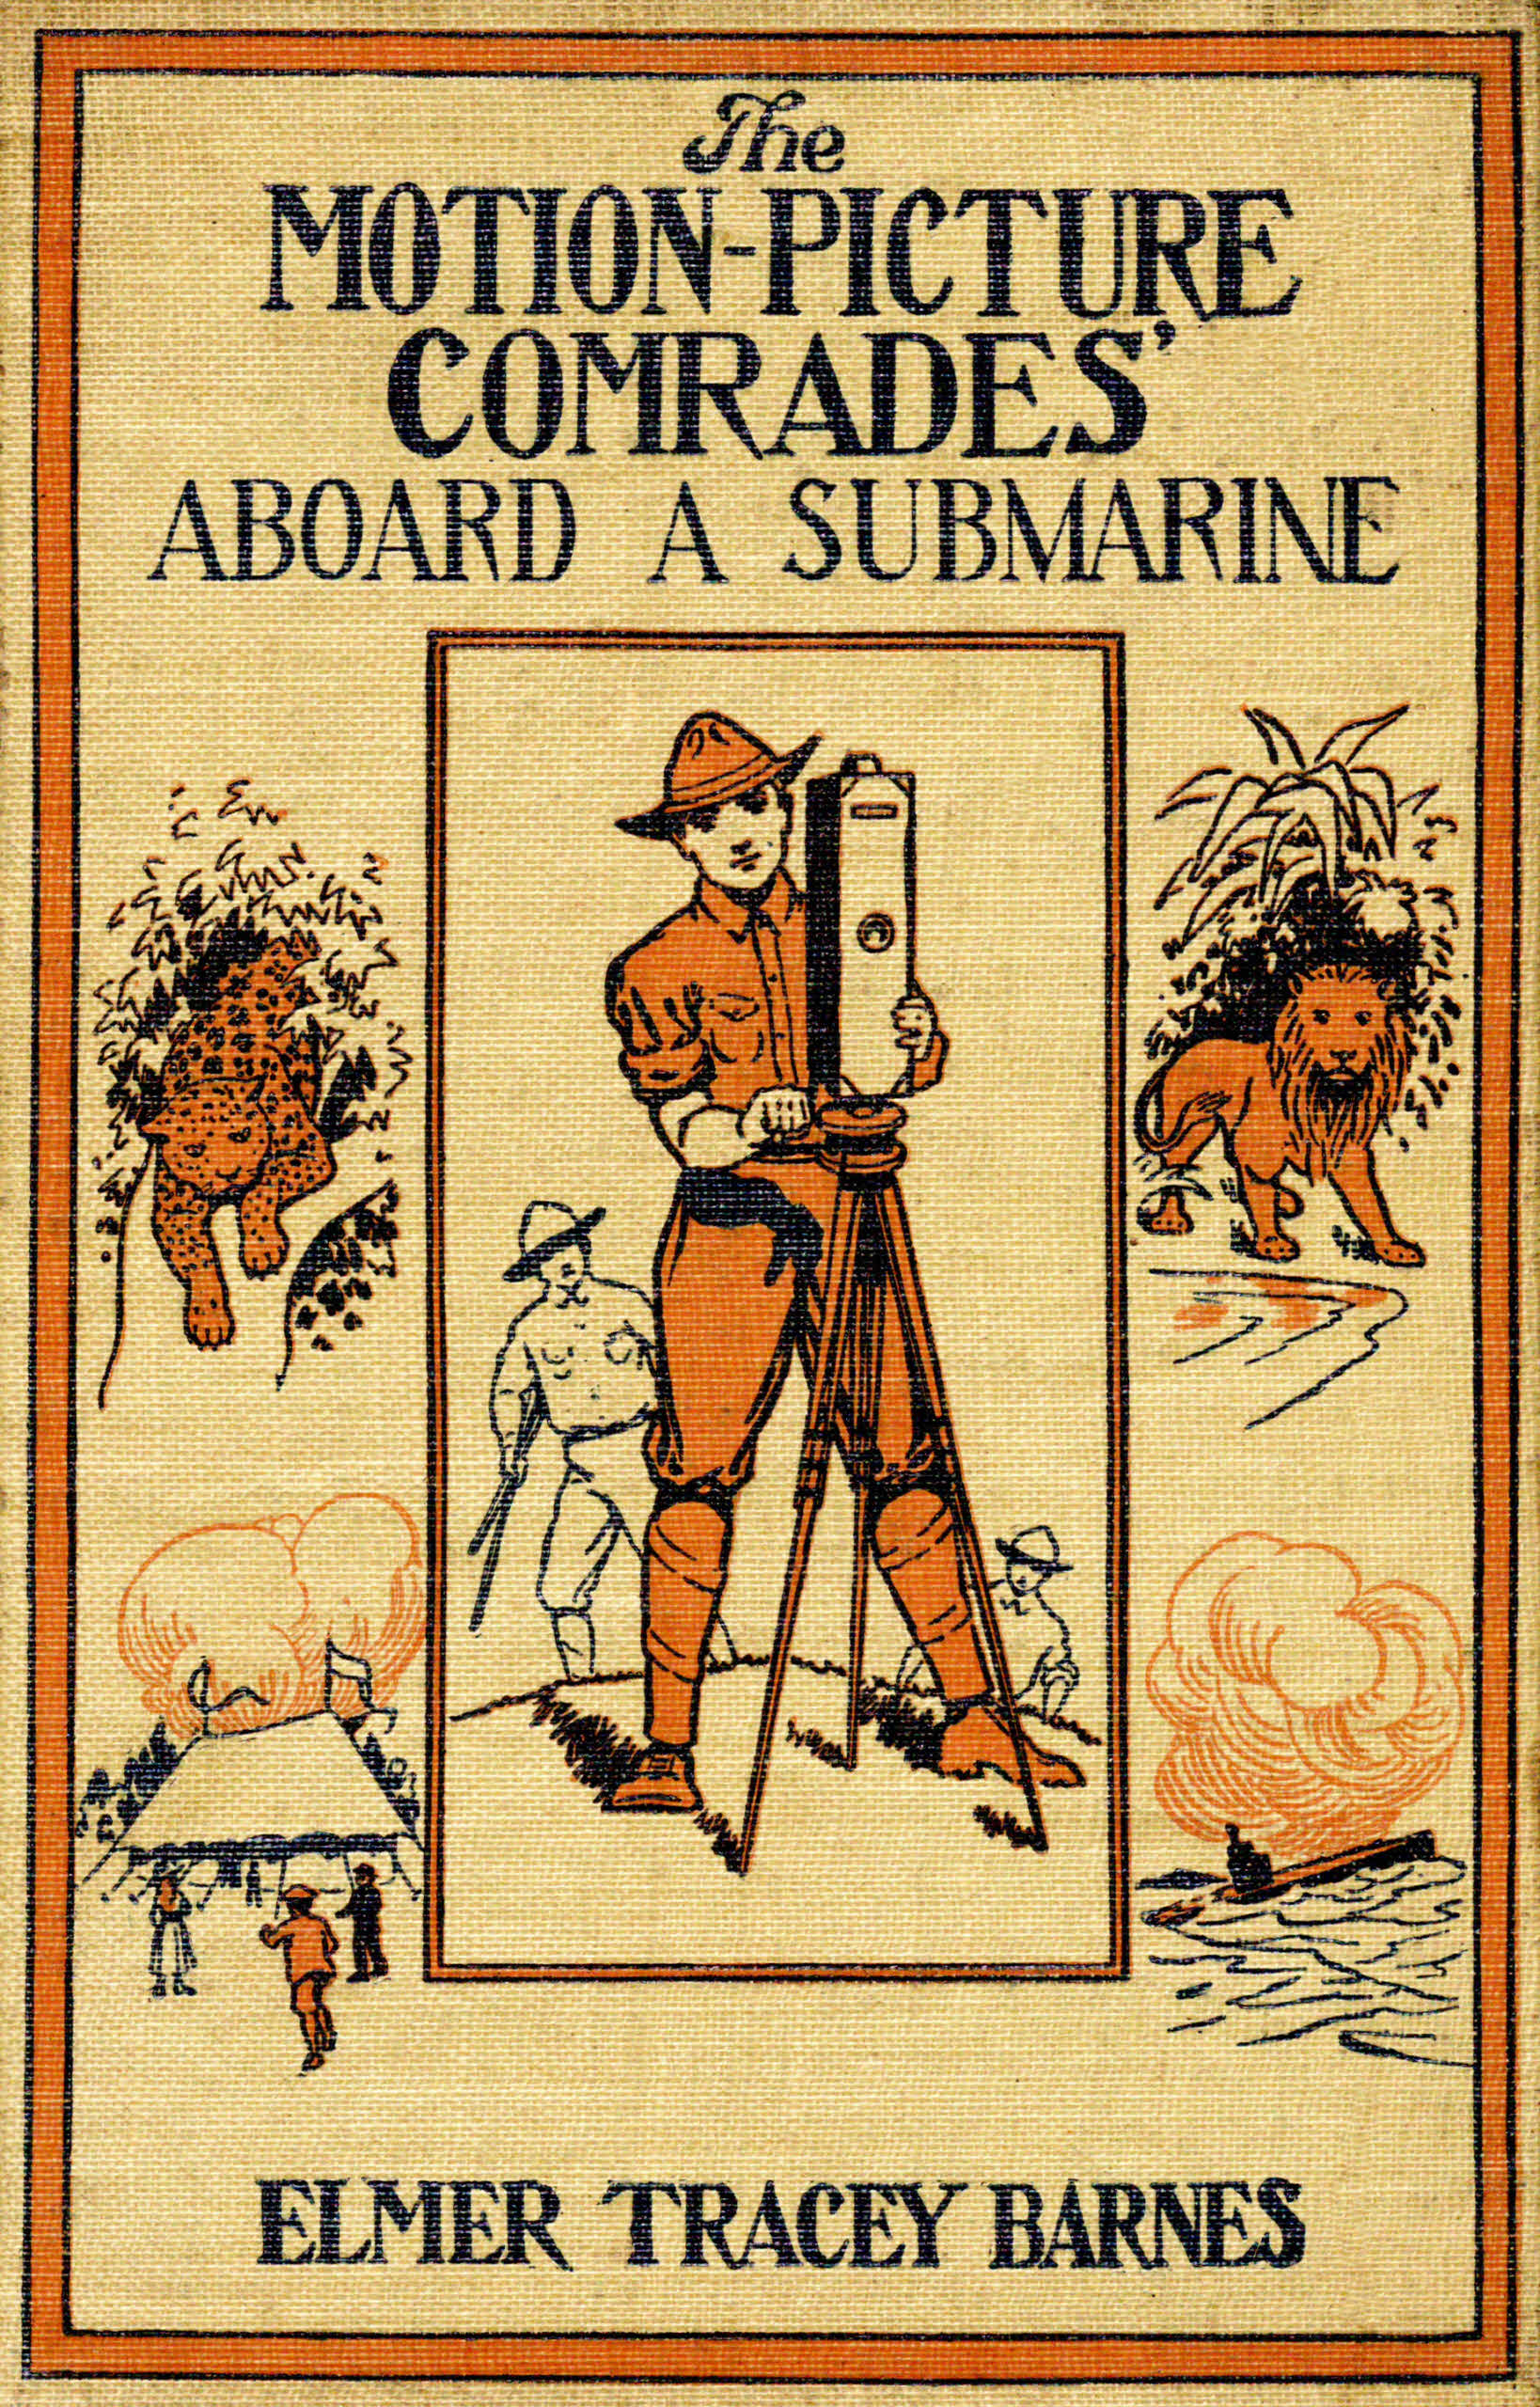 The motion picture comrades aboard a submarine&#10;or, Searching for treasure under the sea